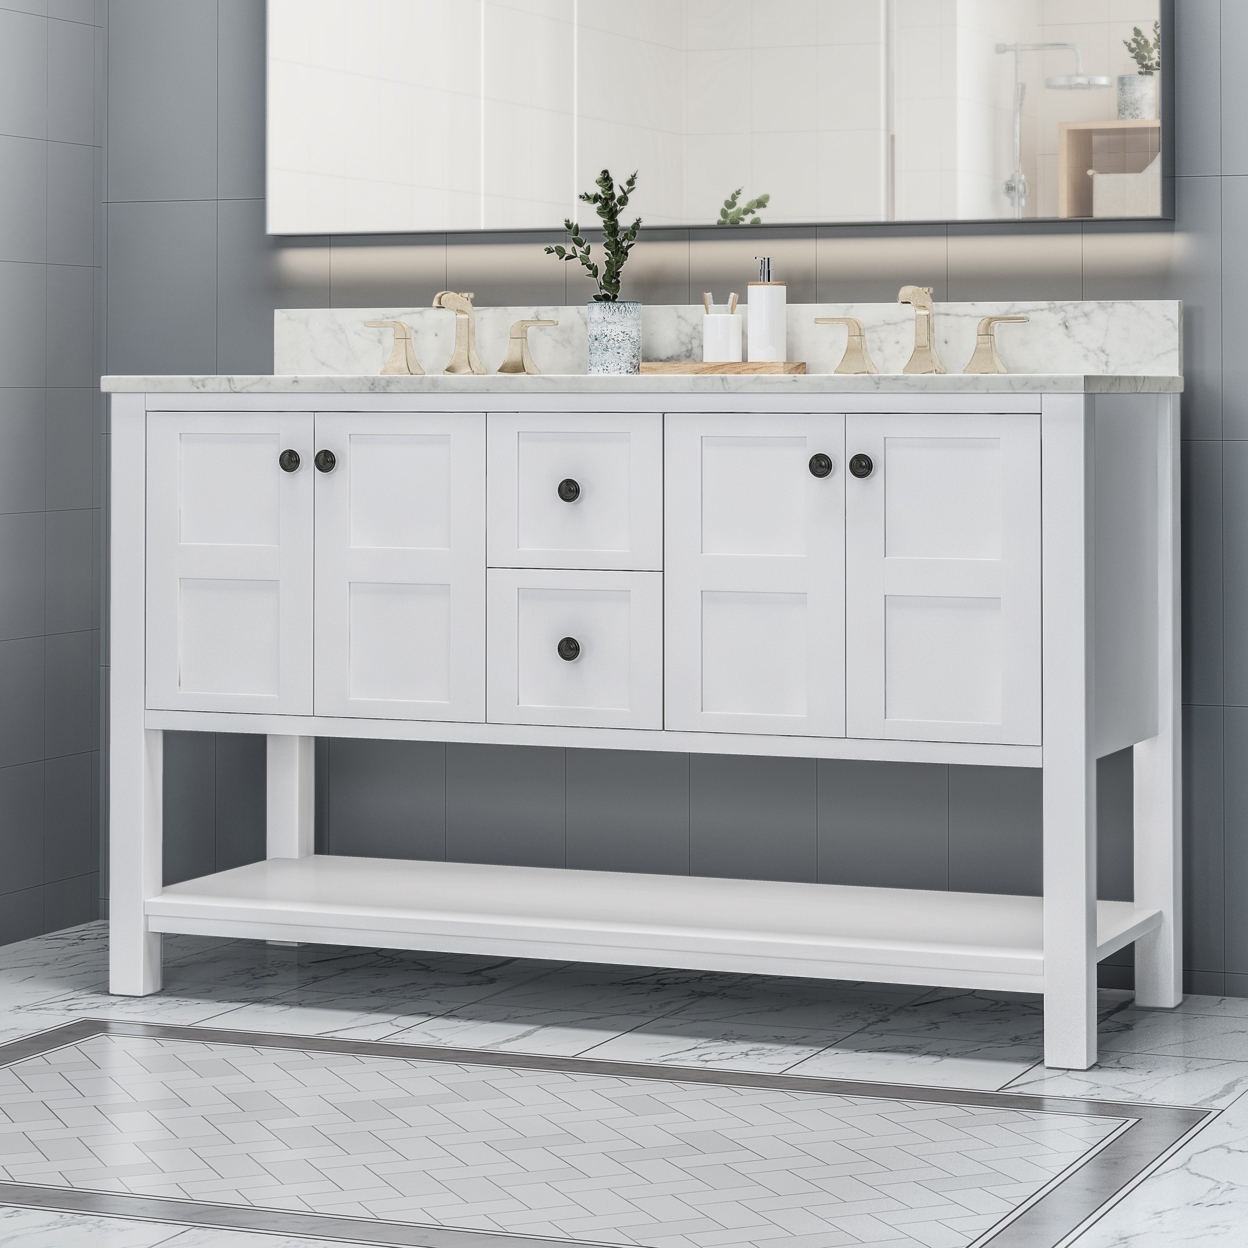 Jamison Contemporary 60 Wood Double Sink Bathroom Vanity With Marble Counter Top With Carrara White Marble - White